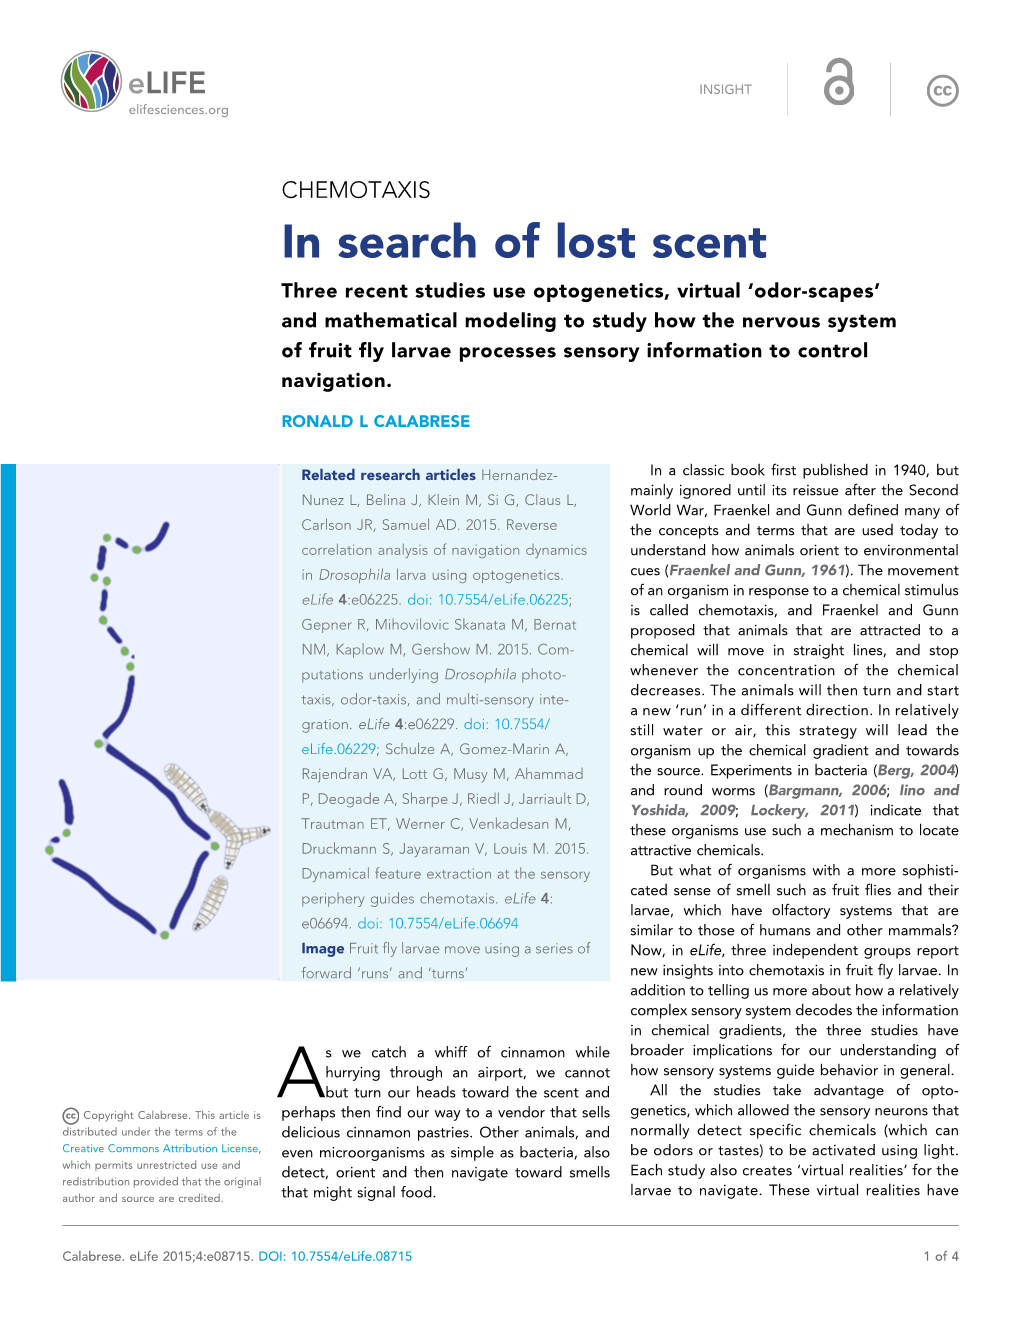 In Search of Lost Scent